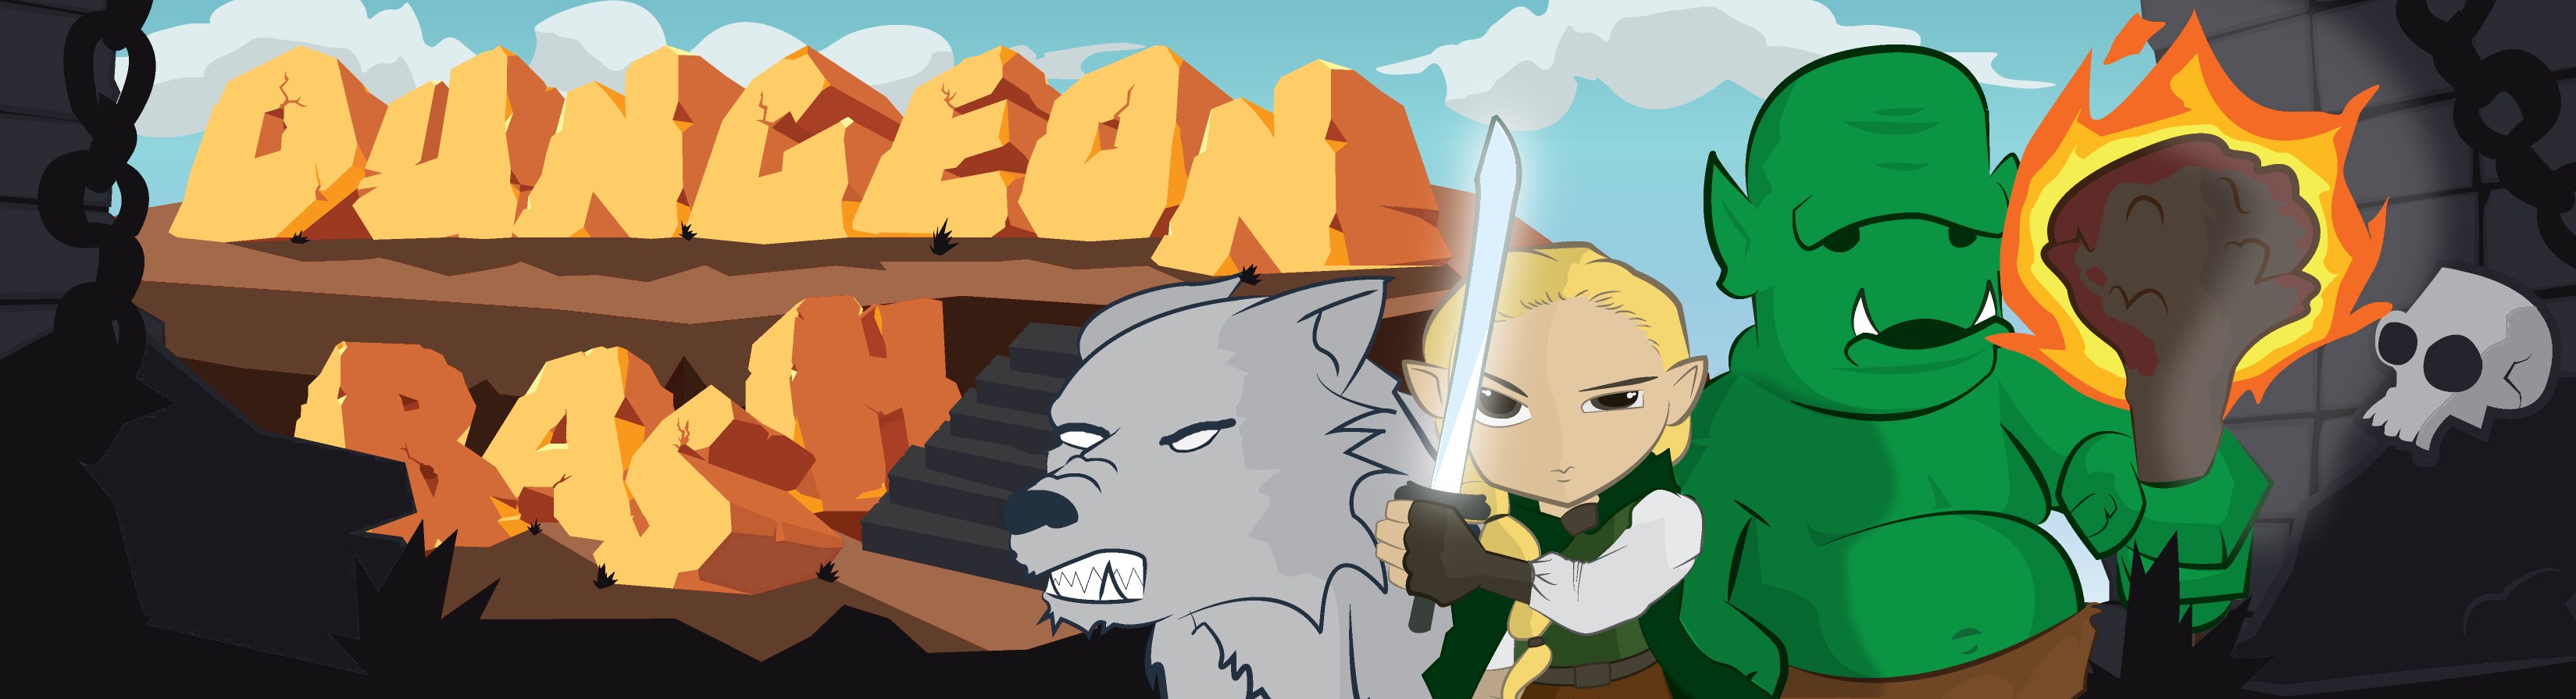 Dungeon Bash Launches new Kickstarter Campaign